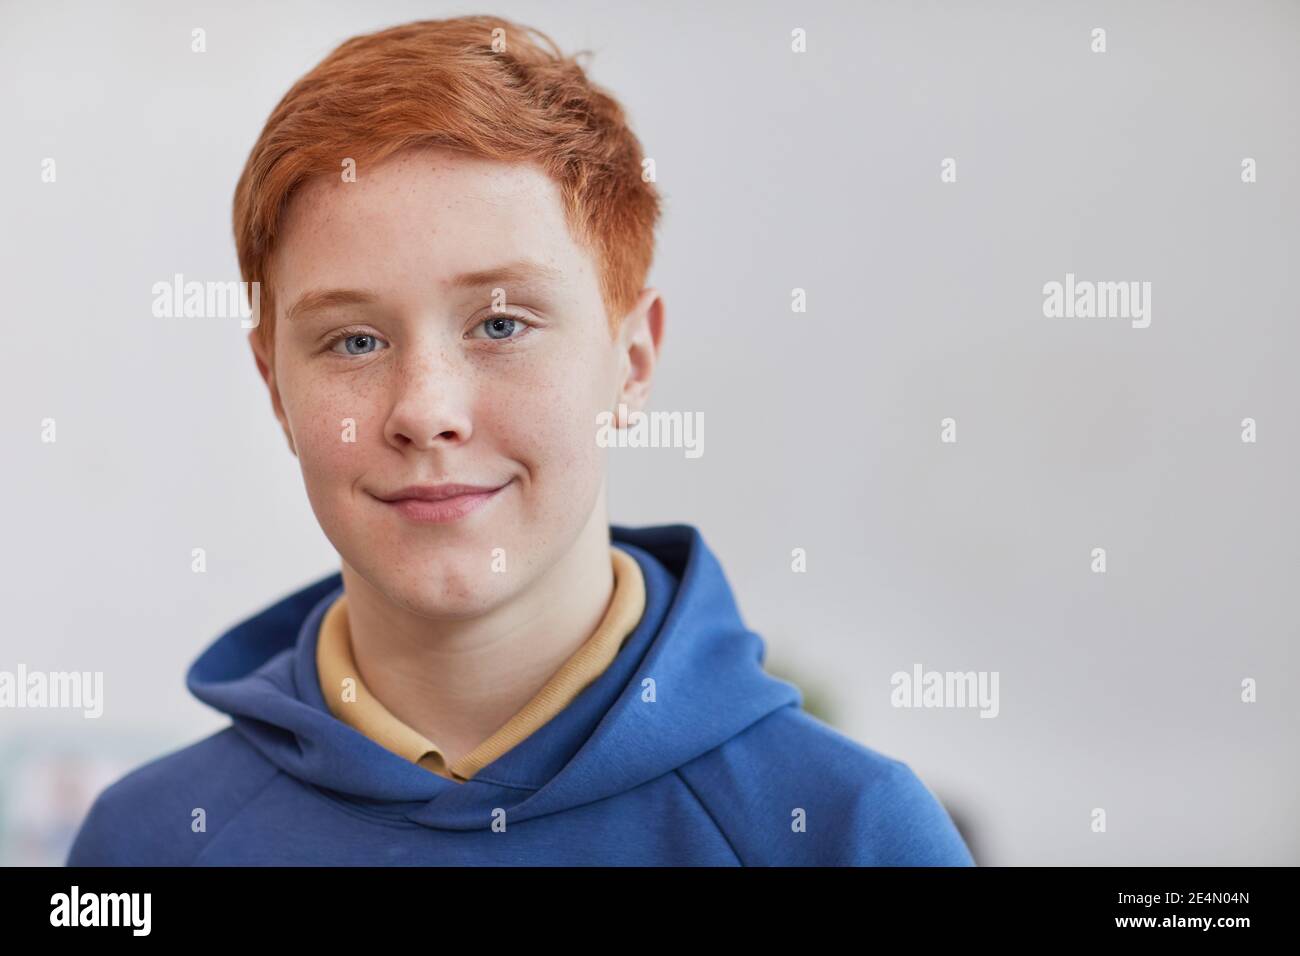 Head and shoulders portrait of freckled red haired boy looking at camera and smiling while standing against white background, copy space Stock Photo